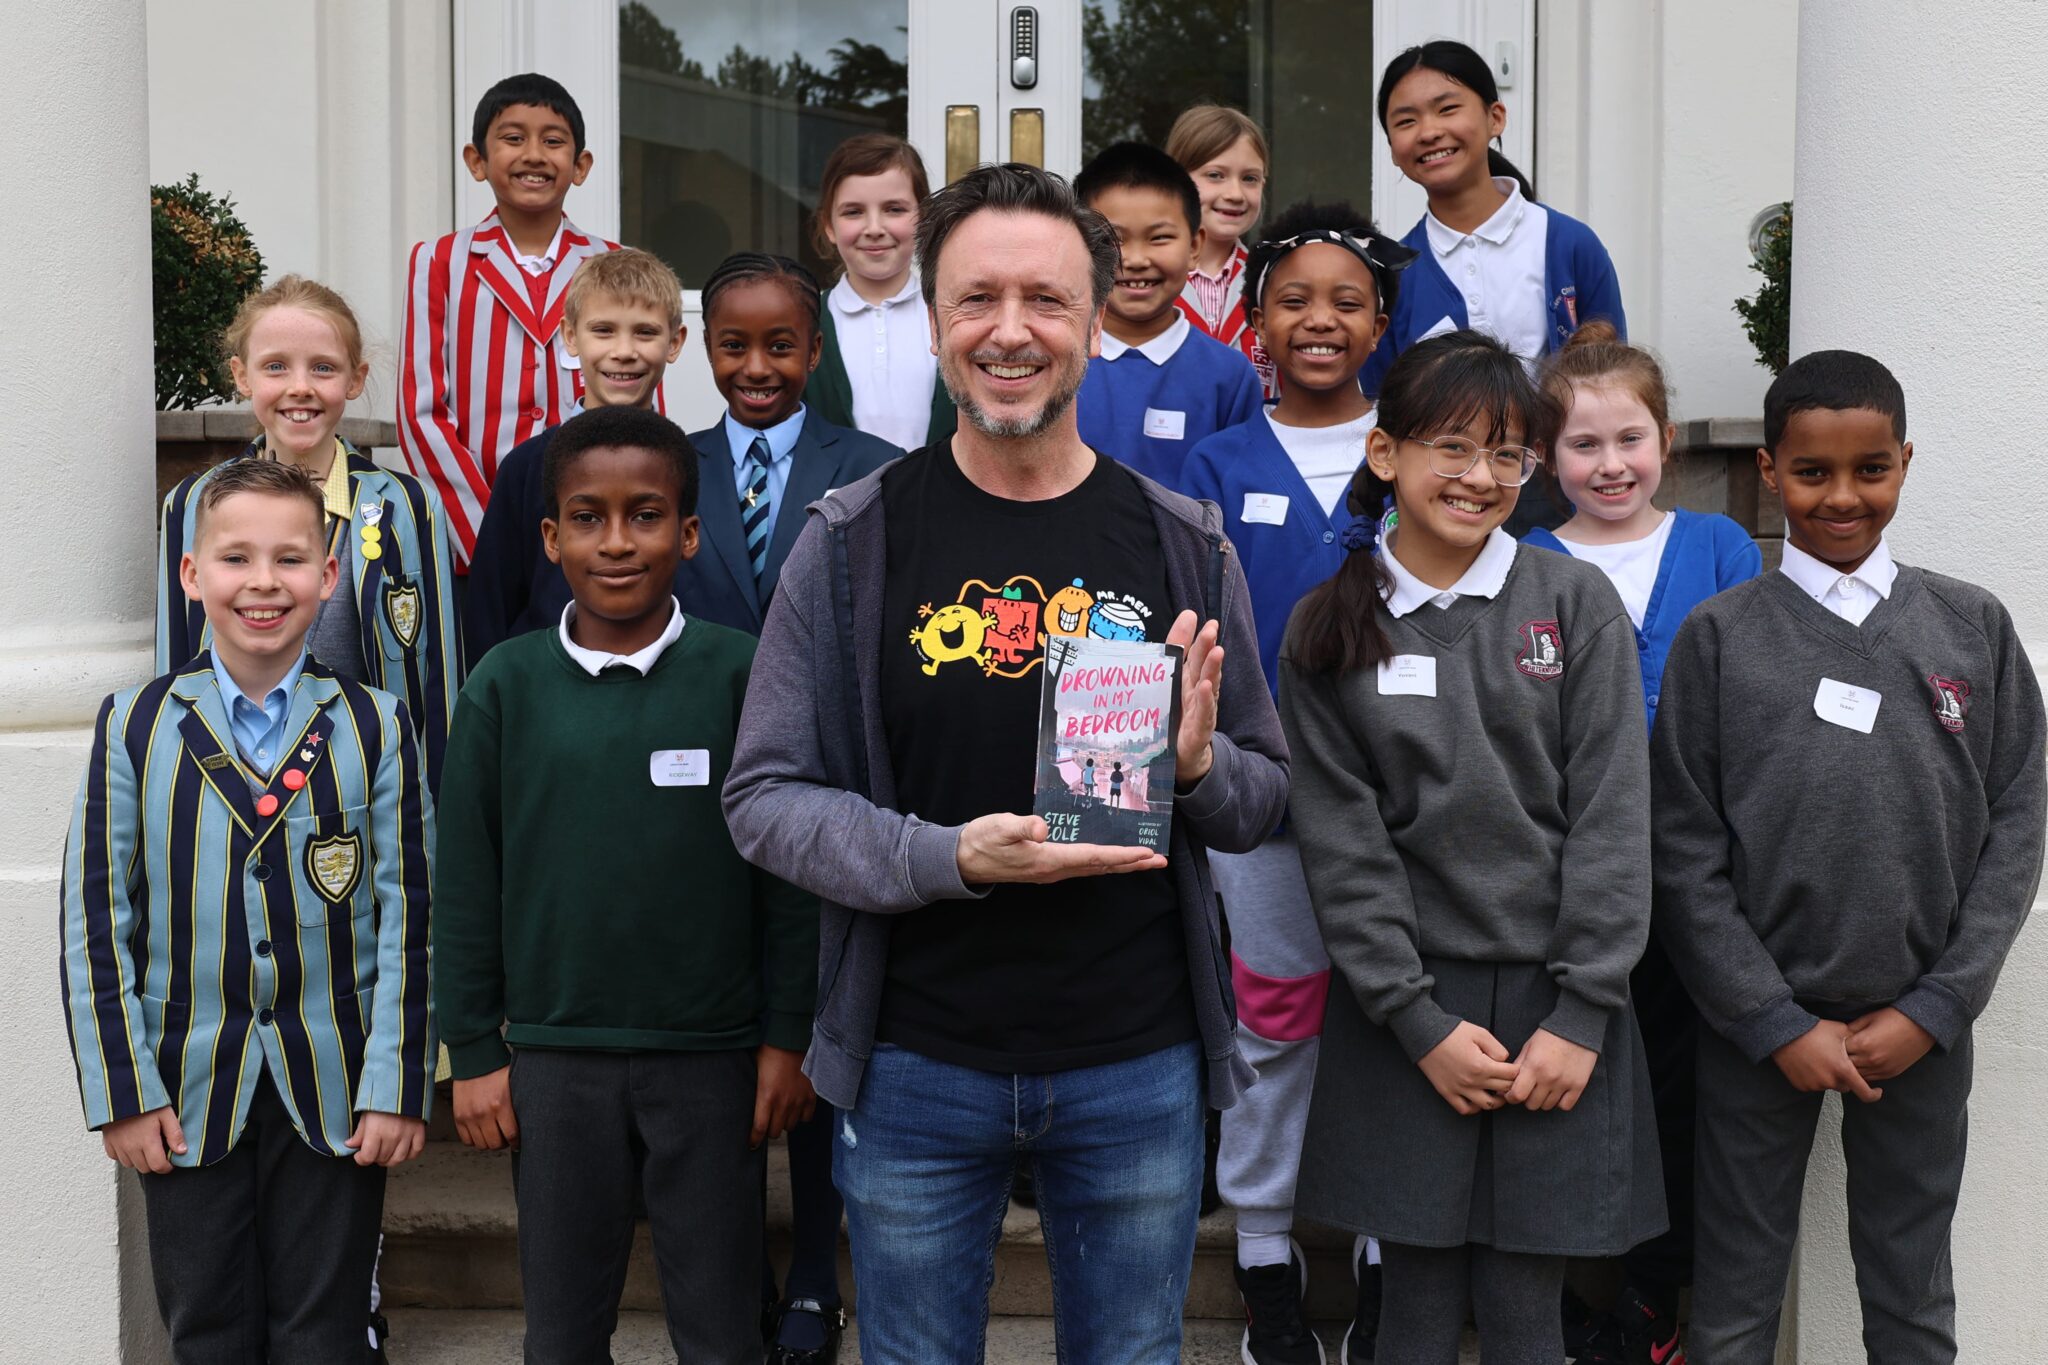 Author Steve Cole inspires 8 Berkshire primary and prep schools with his experience writing children’s books